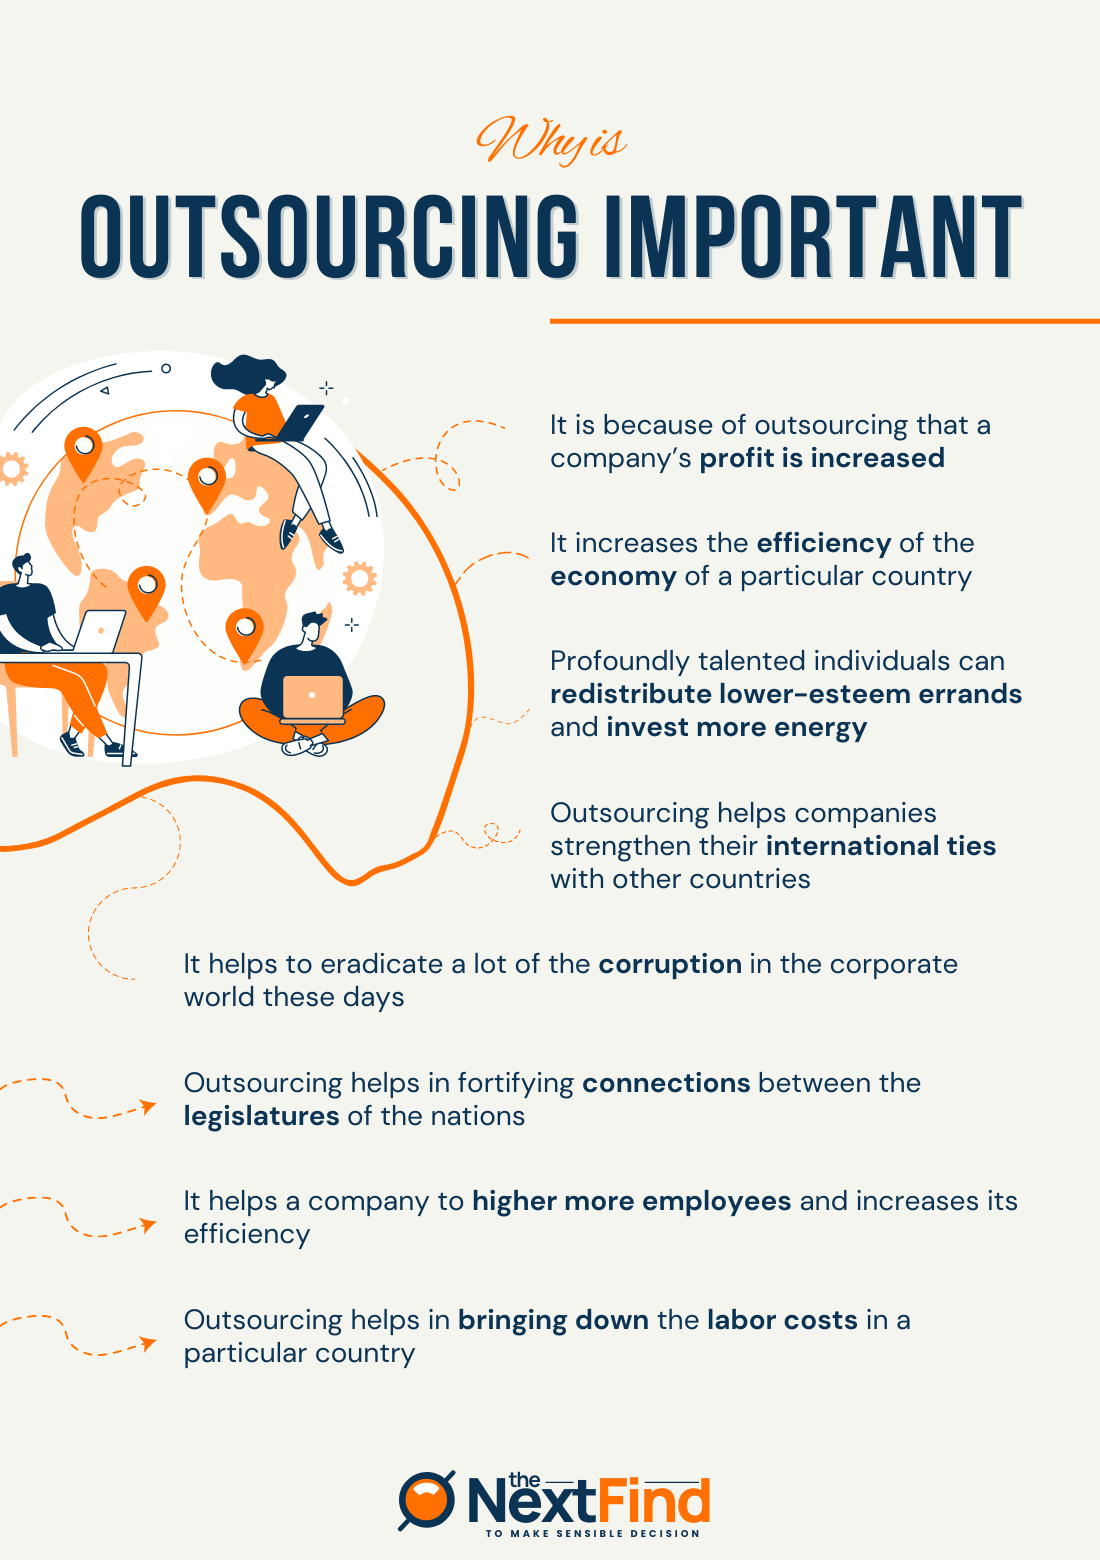 Why is Outsourcing Important